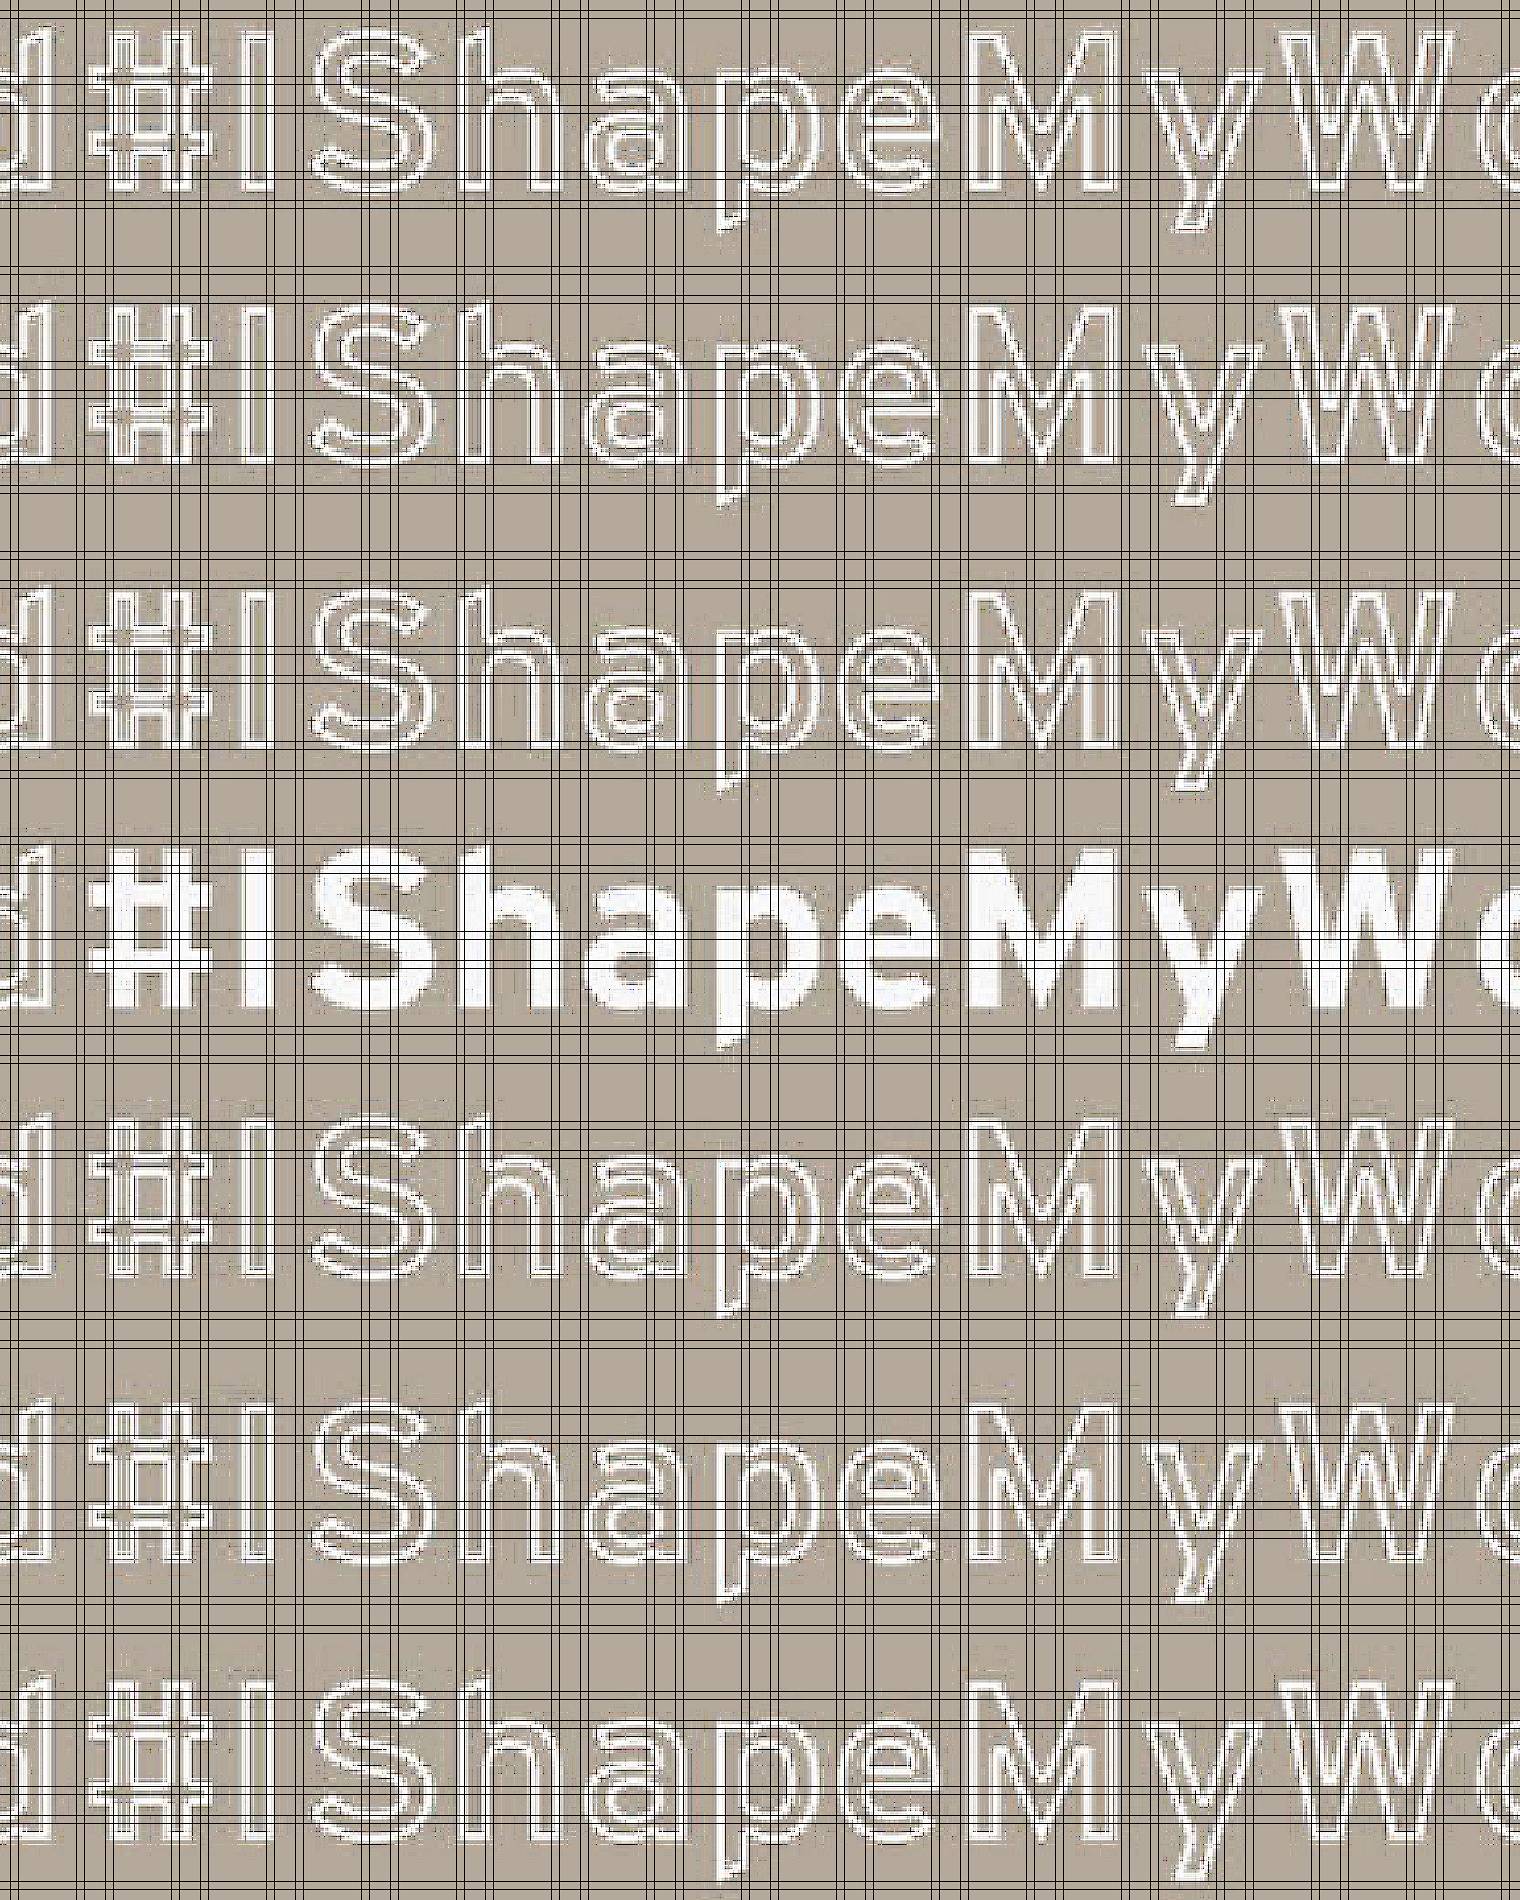 I shape my world header with a beige background and white texgt.